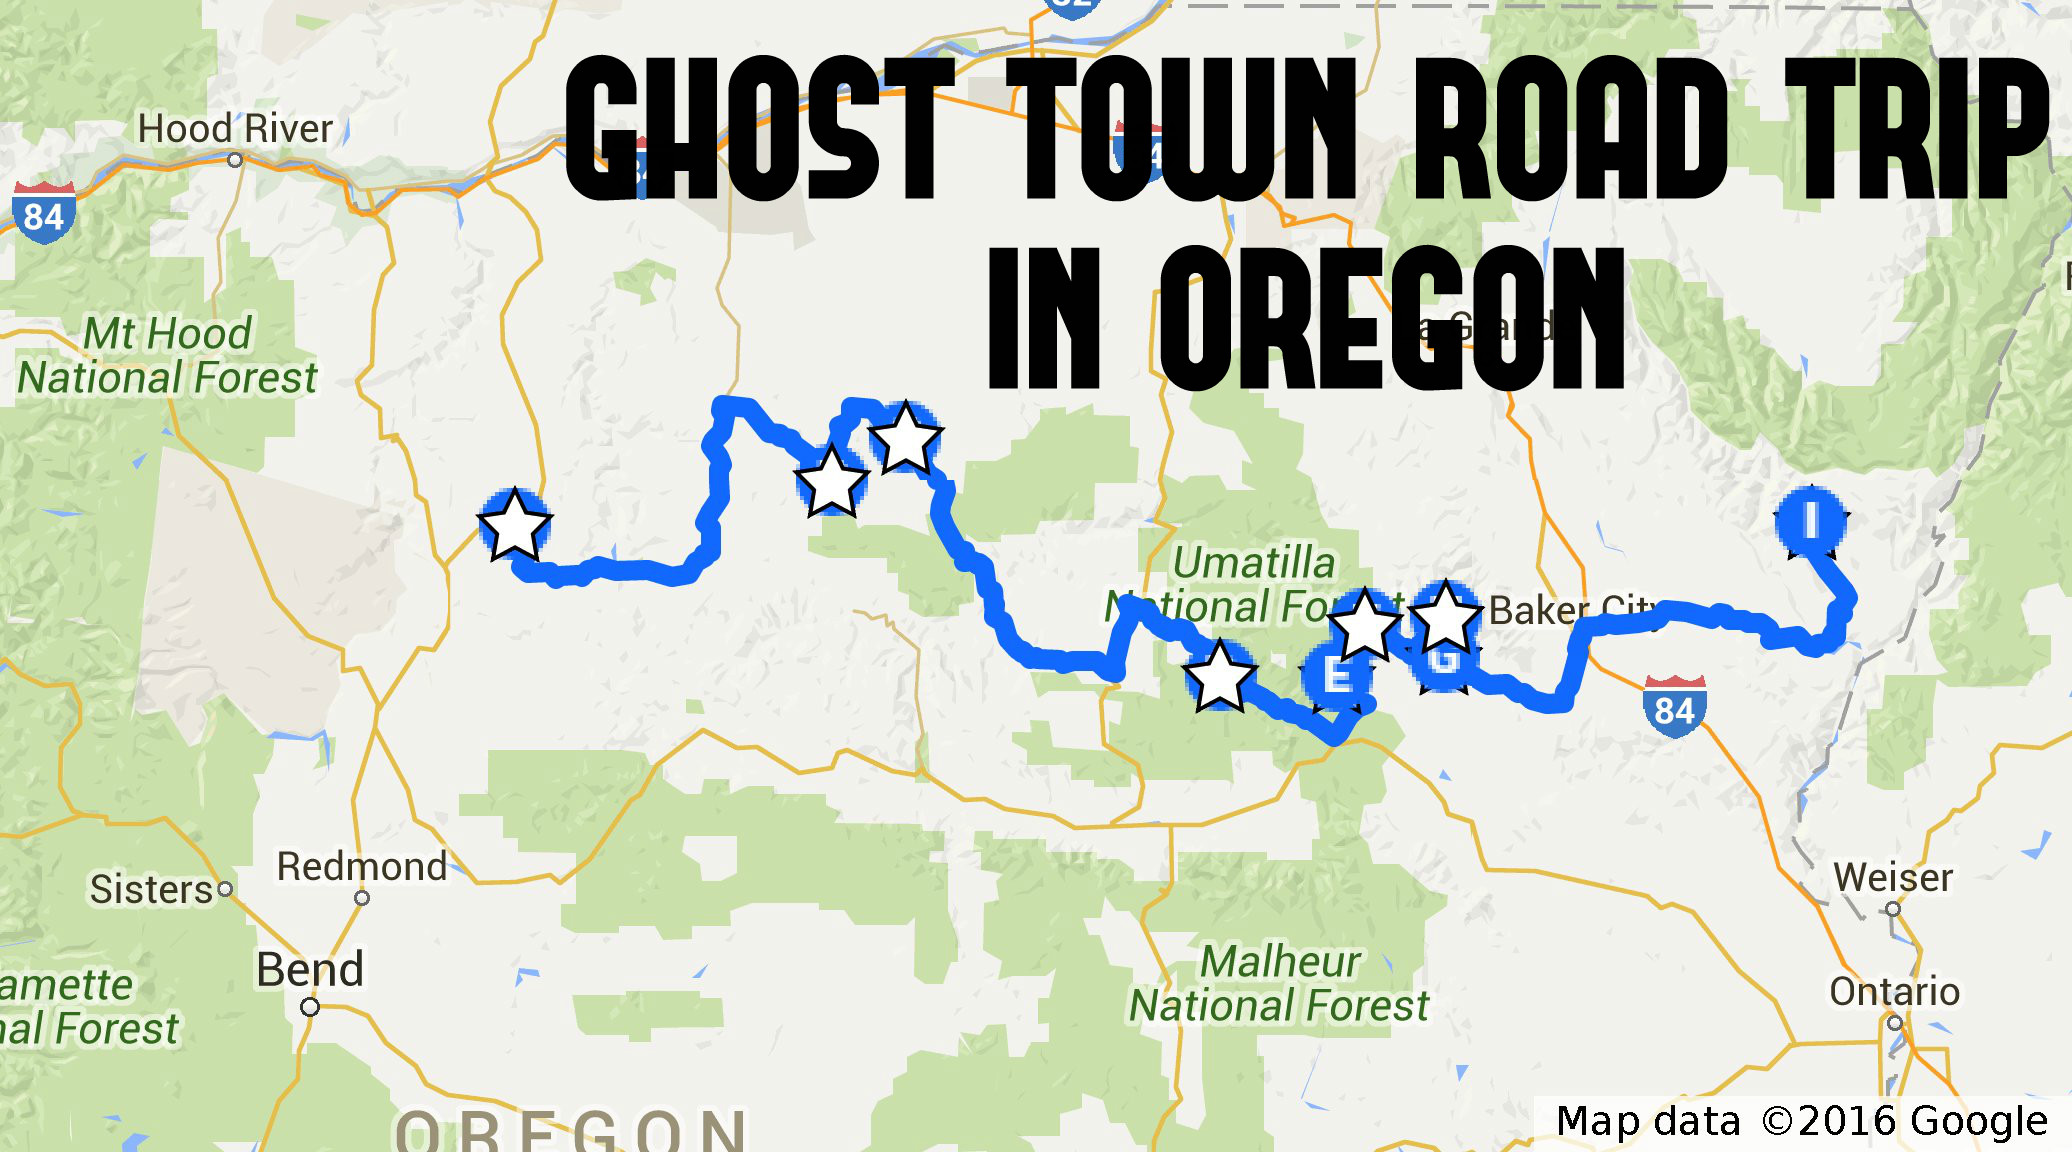 This Ghost Town Road Trip in Oregon is The Perfect Adventure